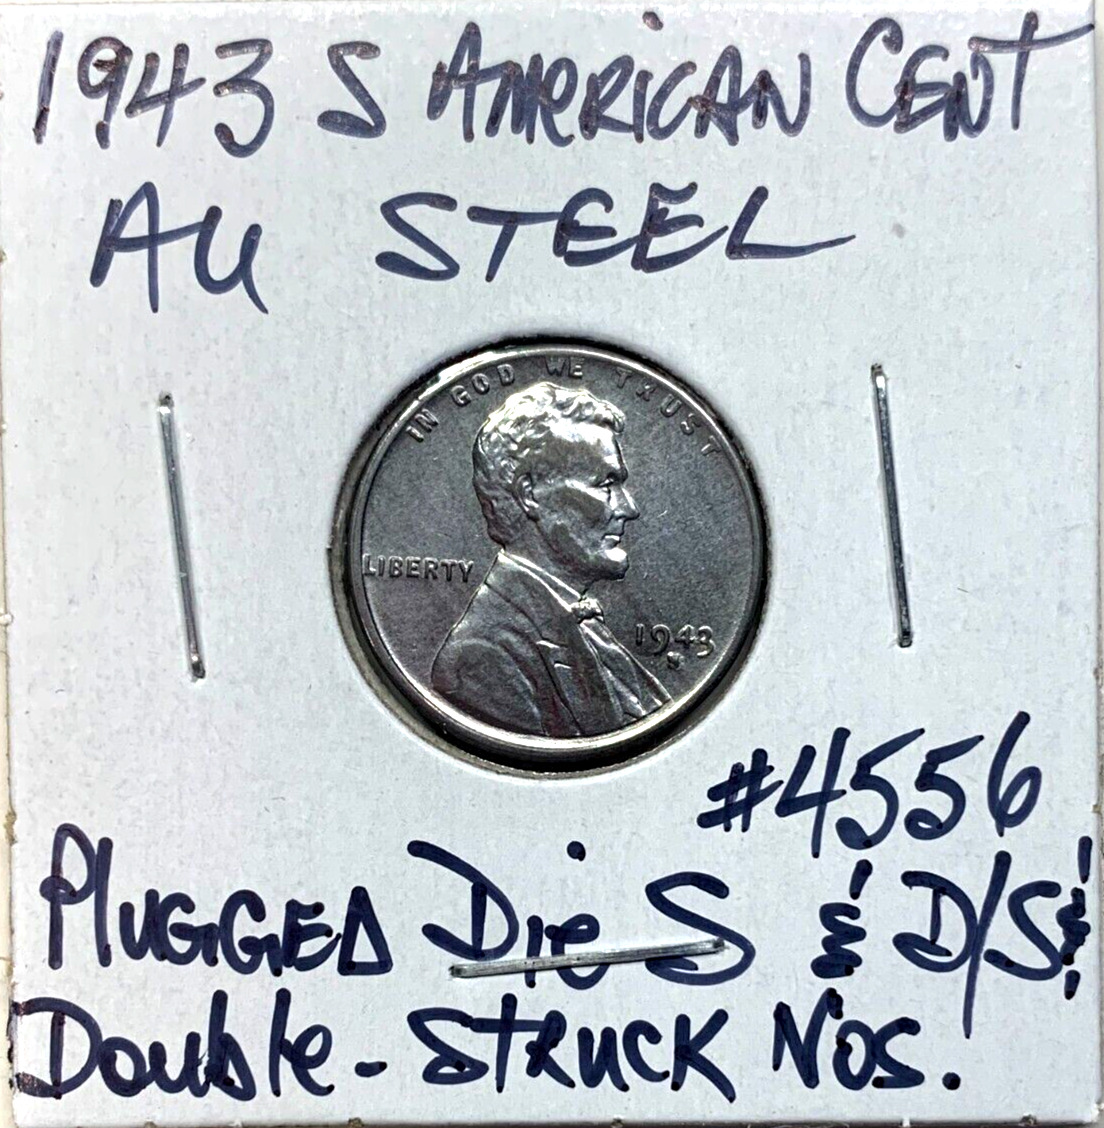 1943 S American Cent AU Steel Plugged S Die & Double-Struck Nos. & Mark Lincoln